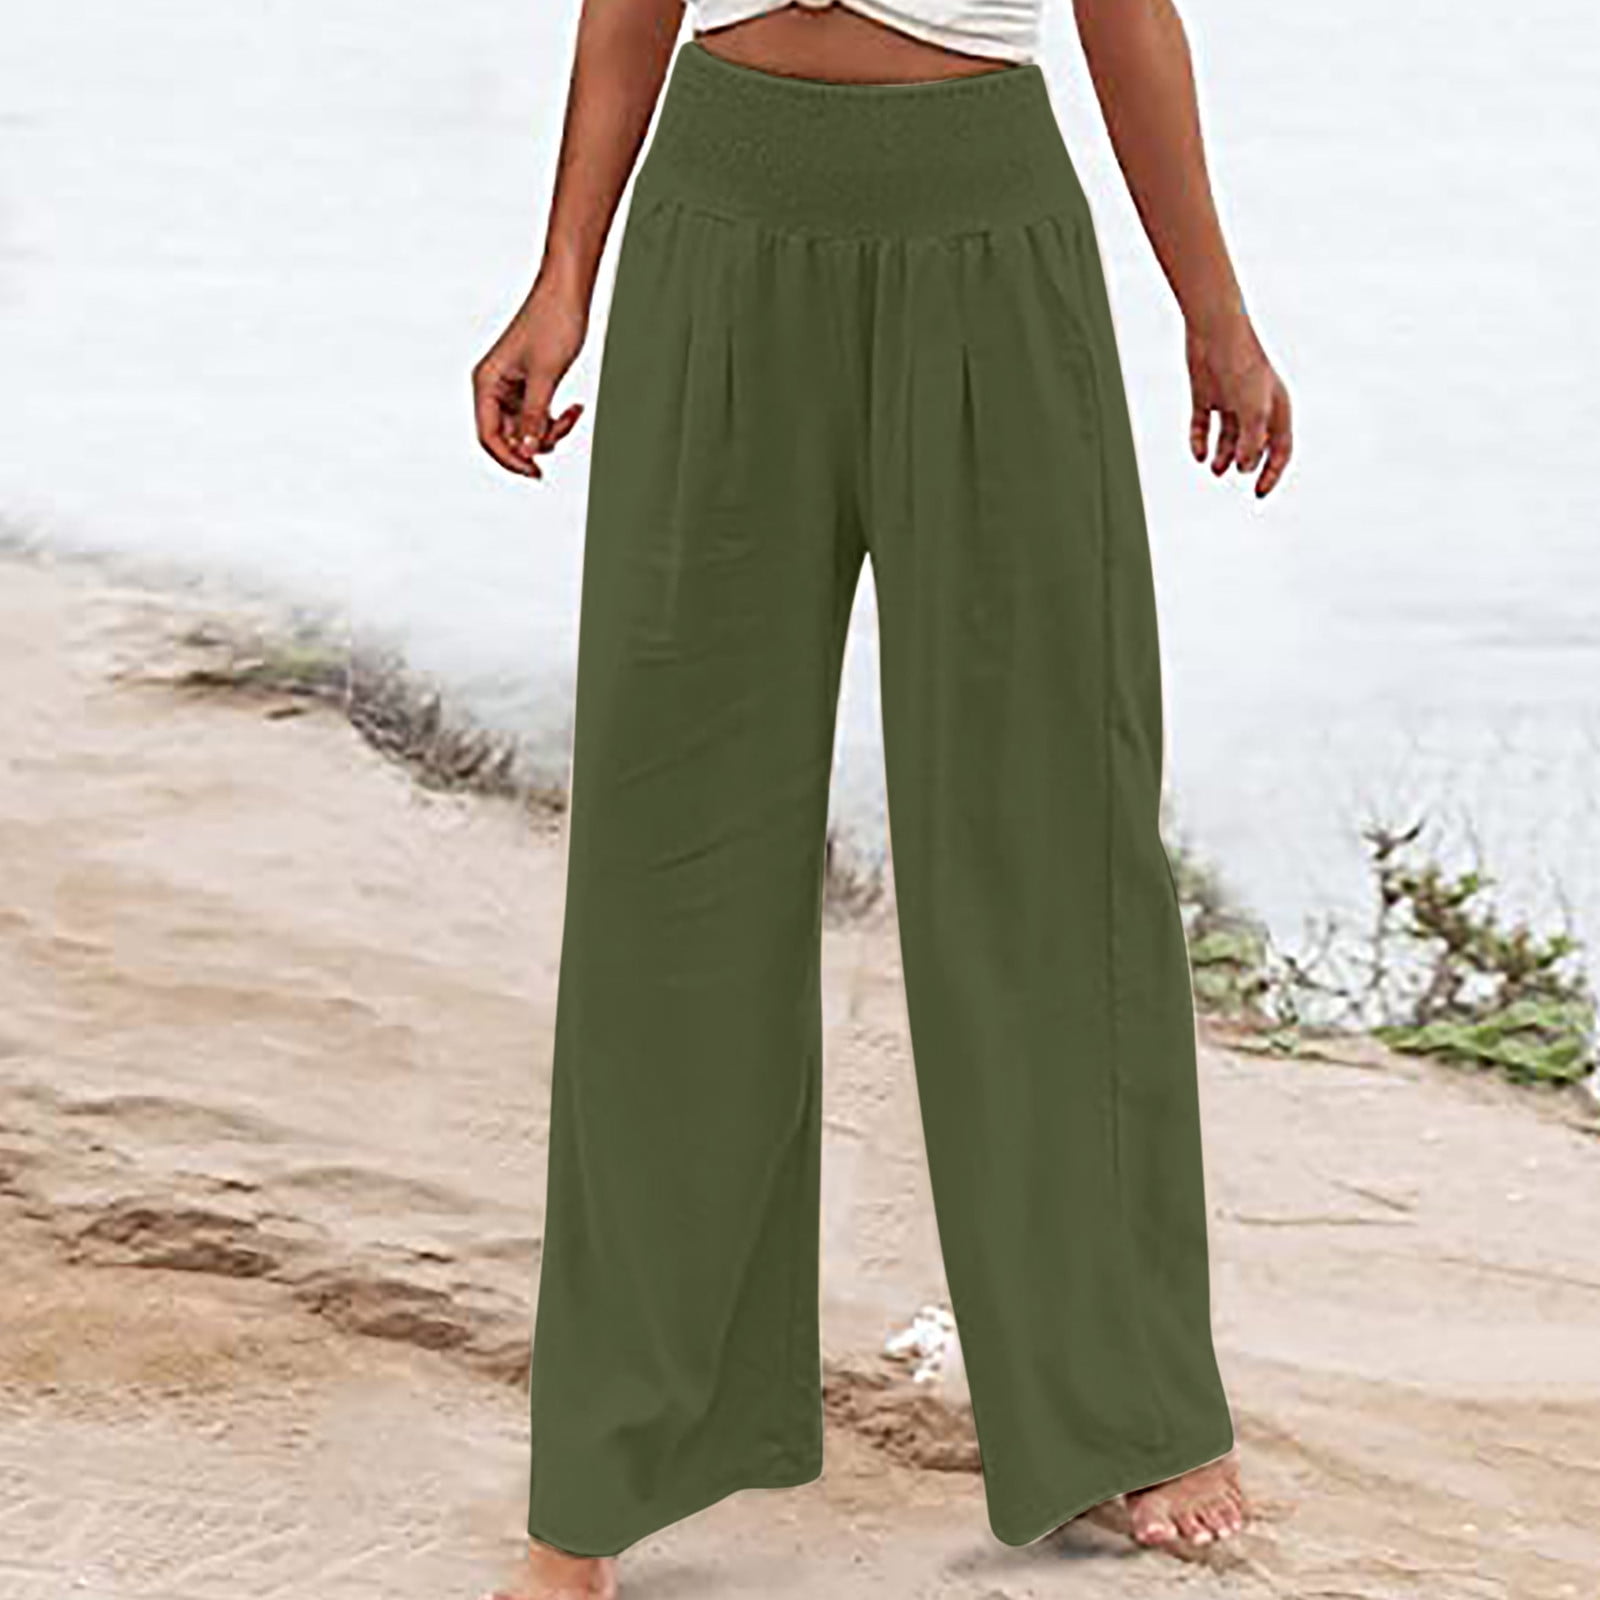 SELONE Linen Pants for Women Plus Size Petite With Pockets High Waist High  Rise Elastic Waist Casual Straight Leg Solid Color Bandage Comfortable